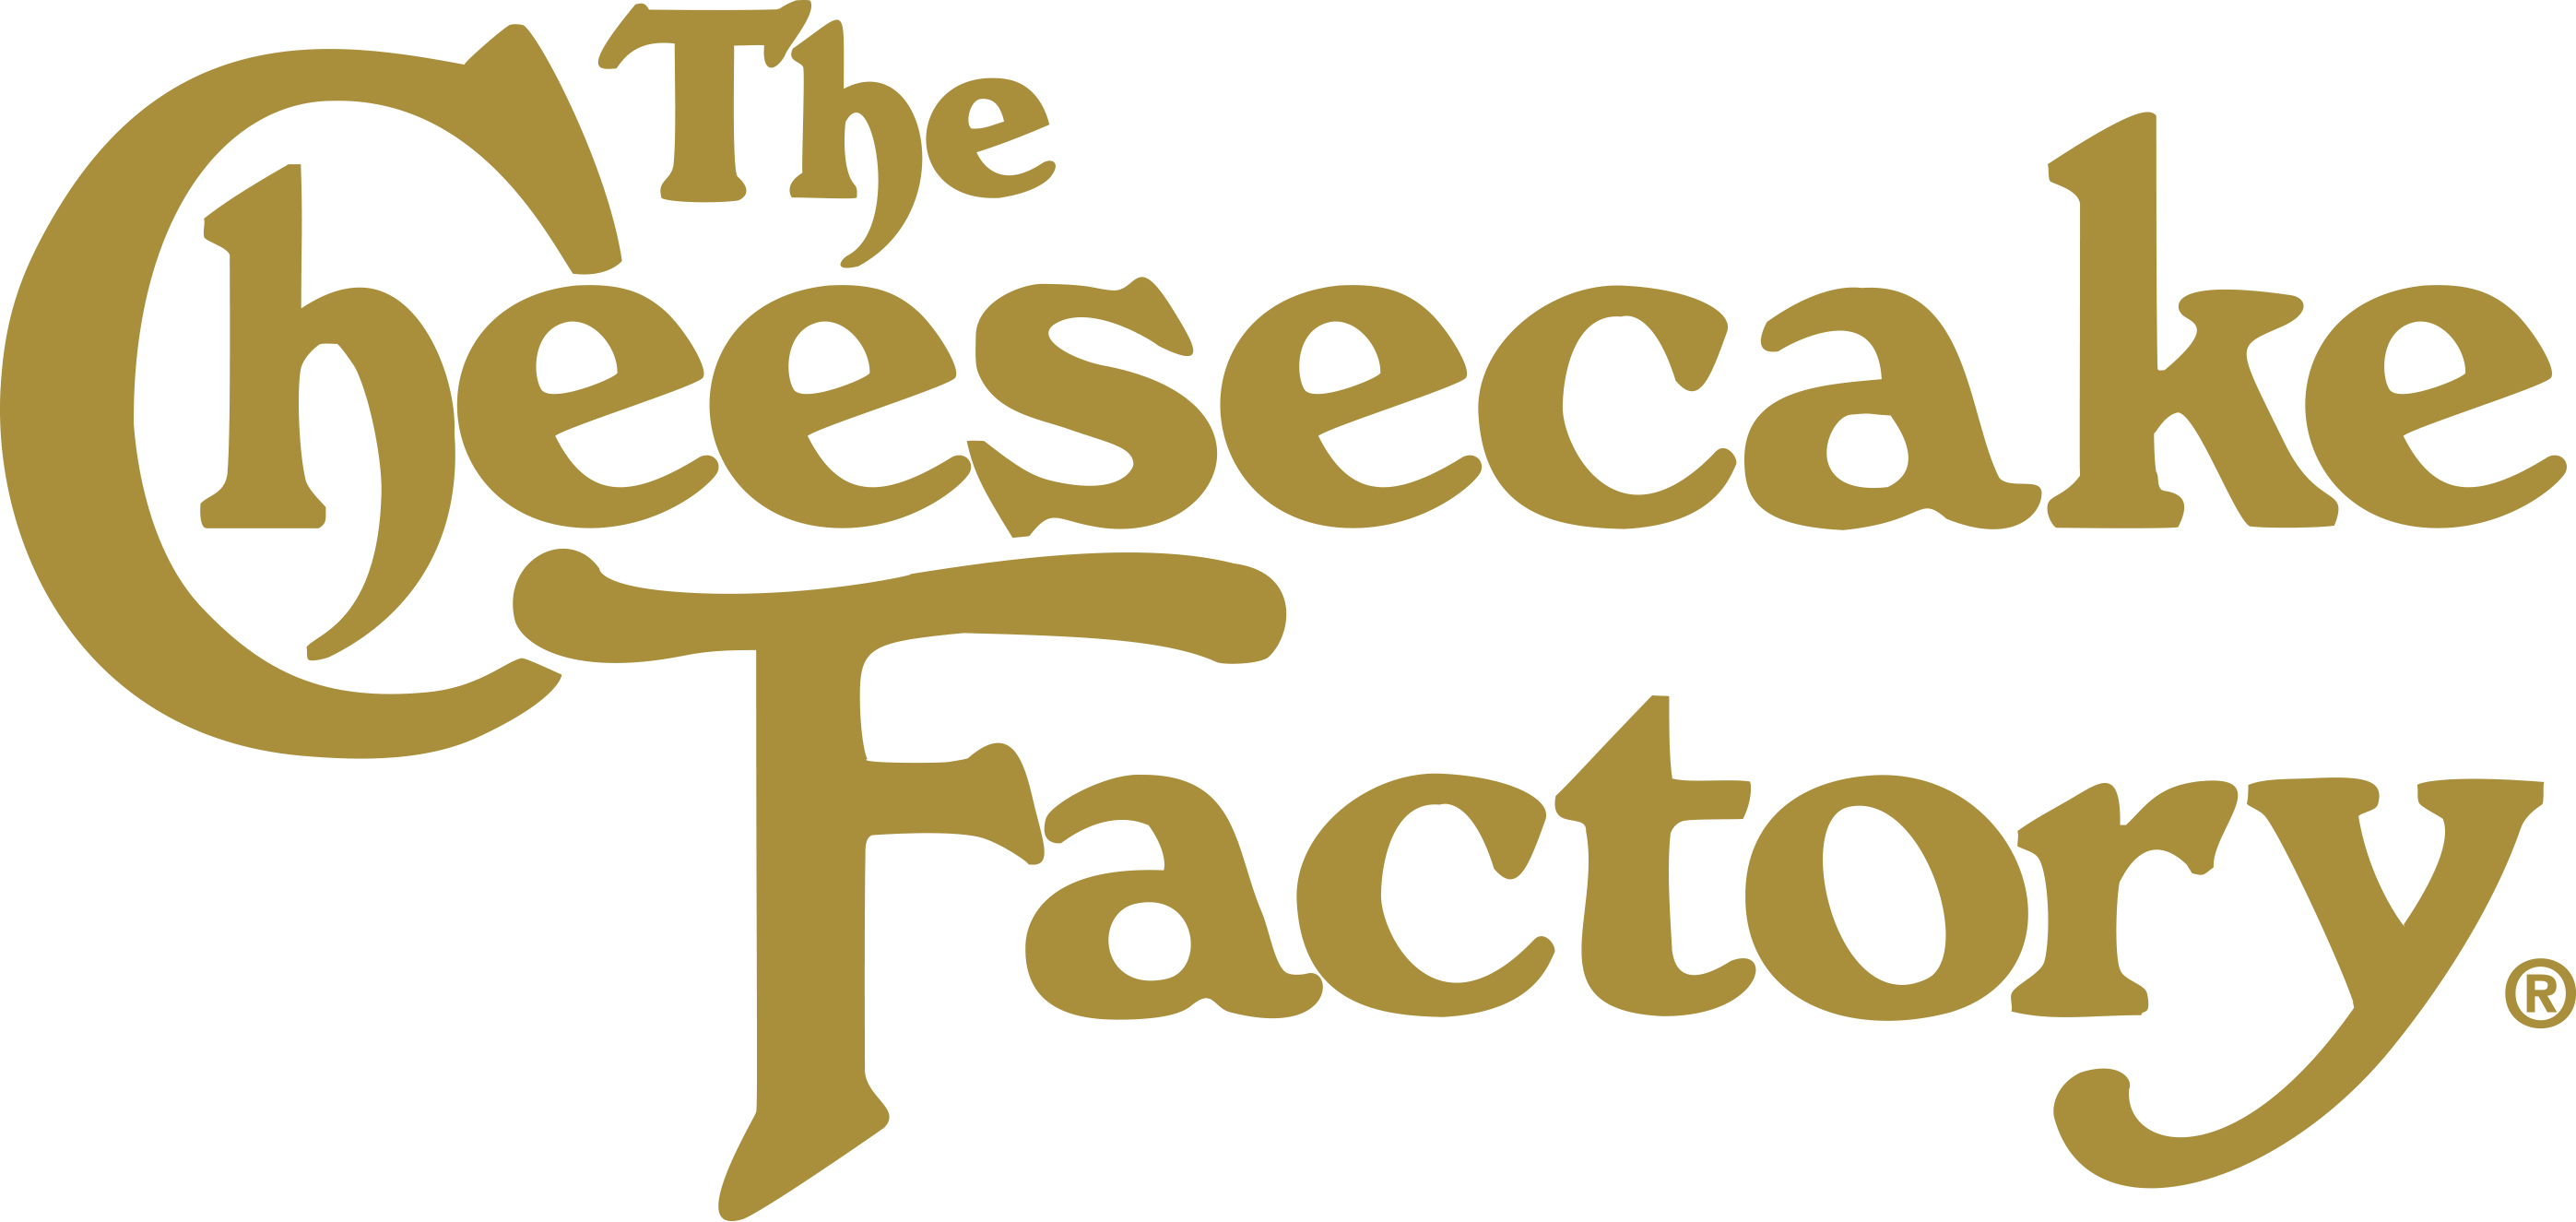 Specialty Cheesecake Slice (Cheesecake Factory)